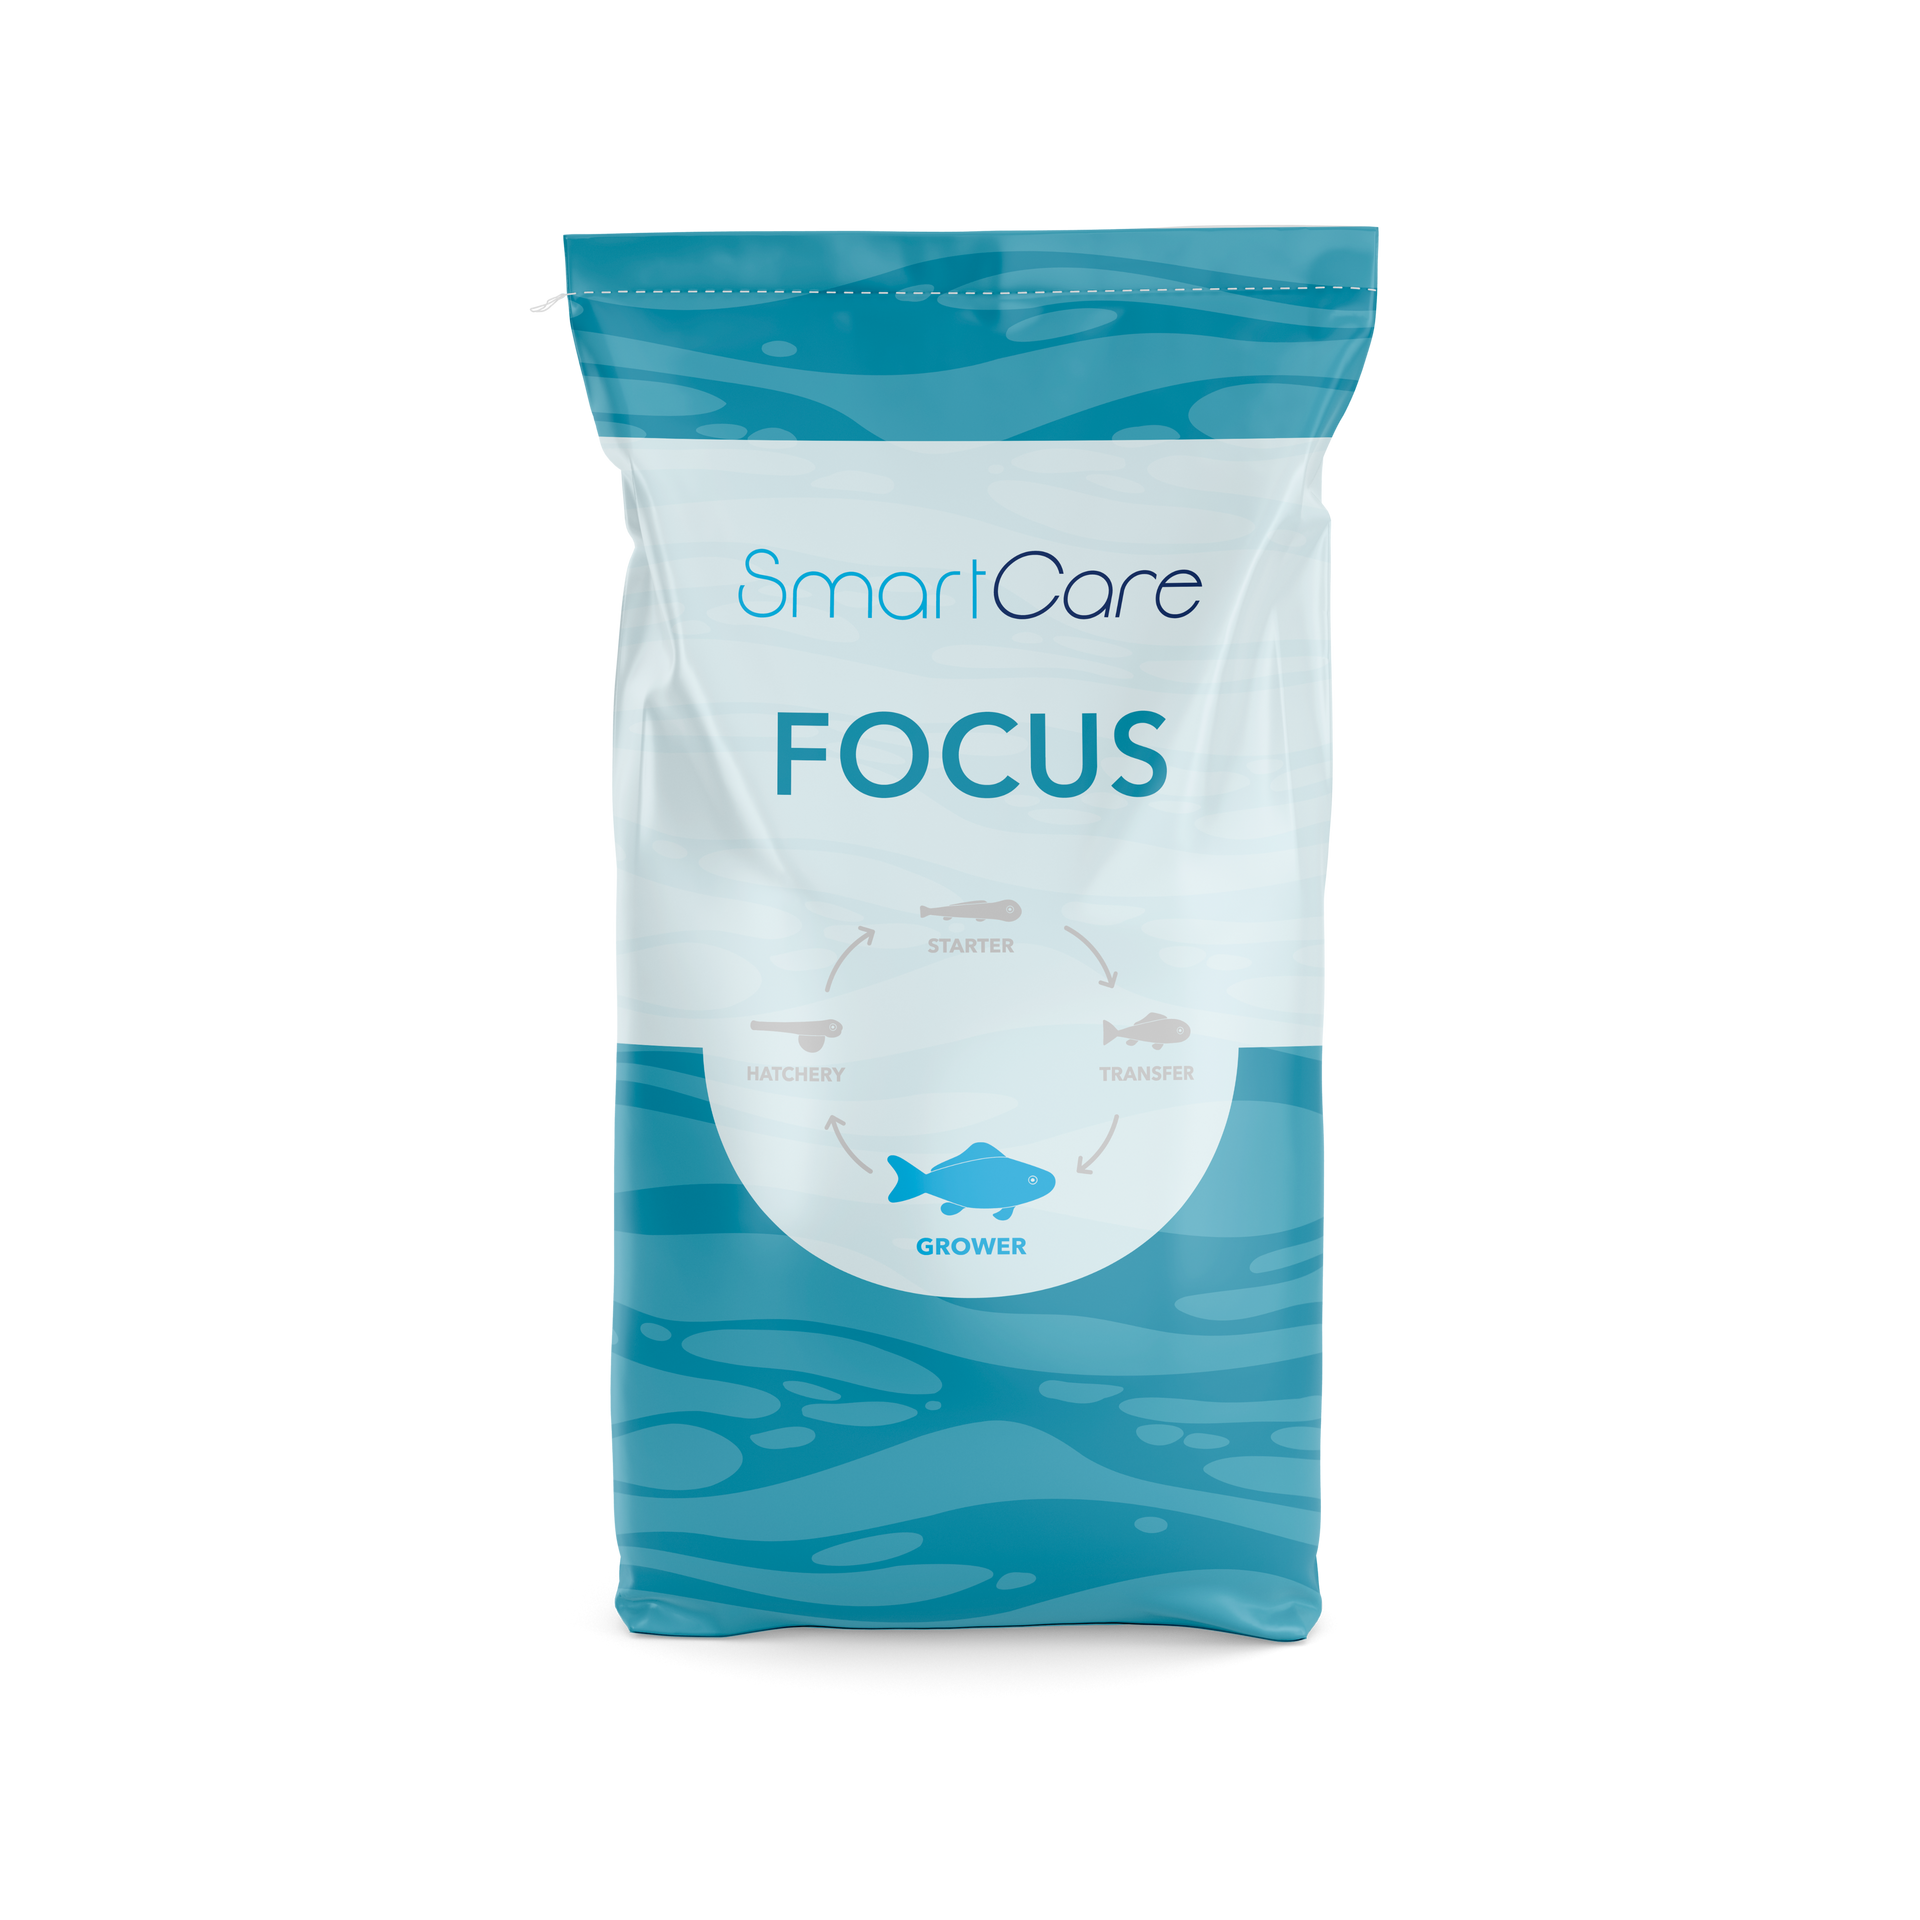 SmartCare FOCUS health feed for trout